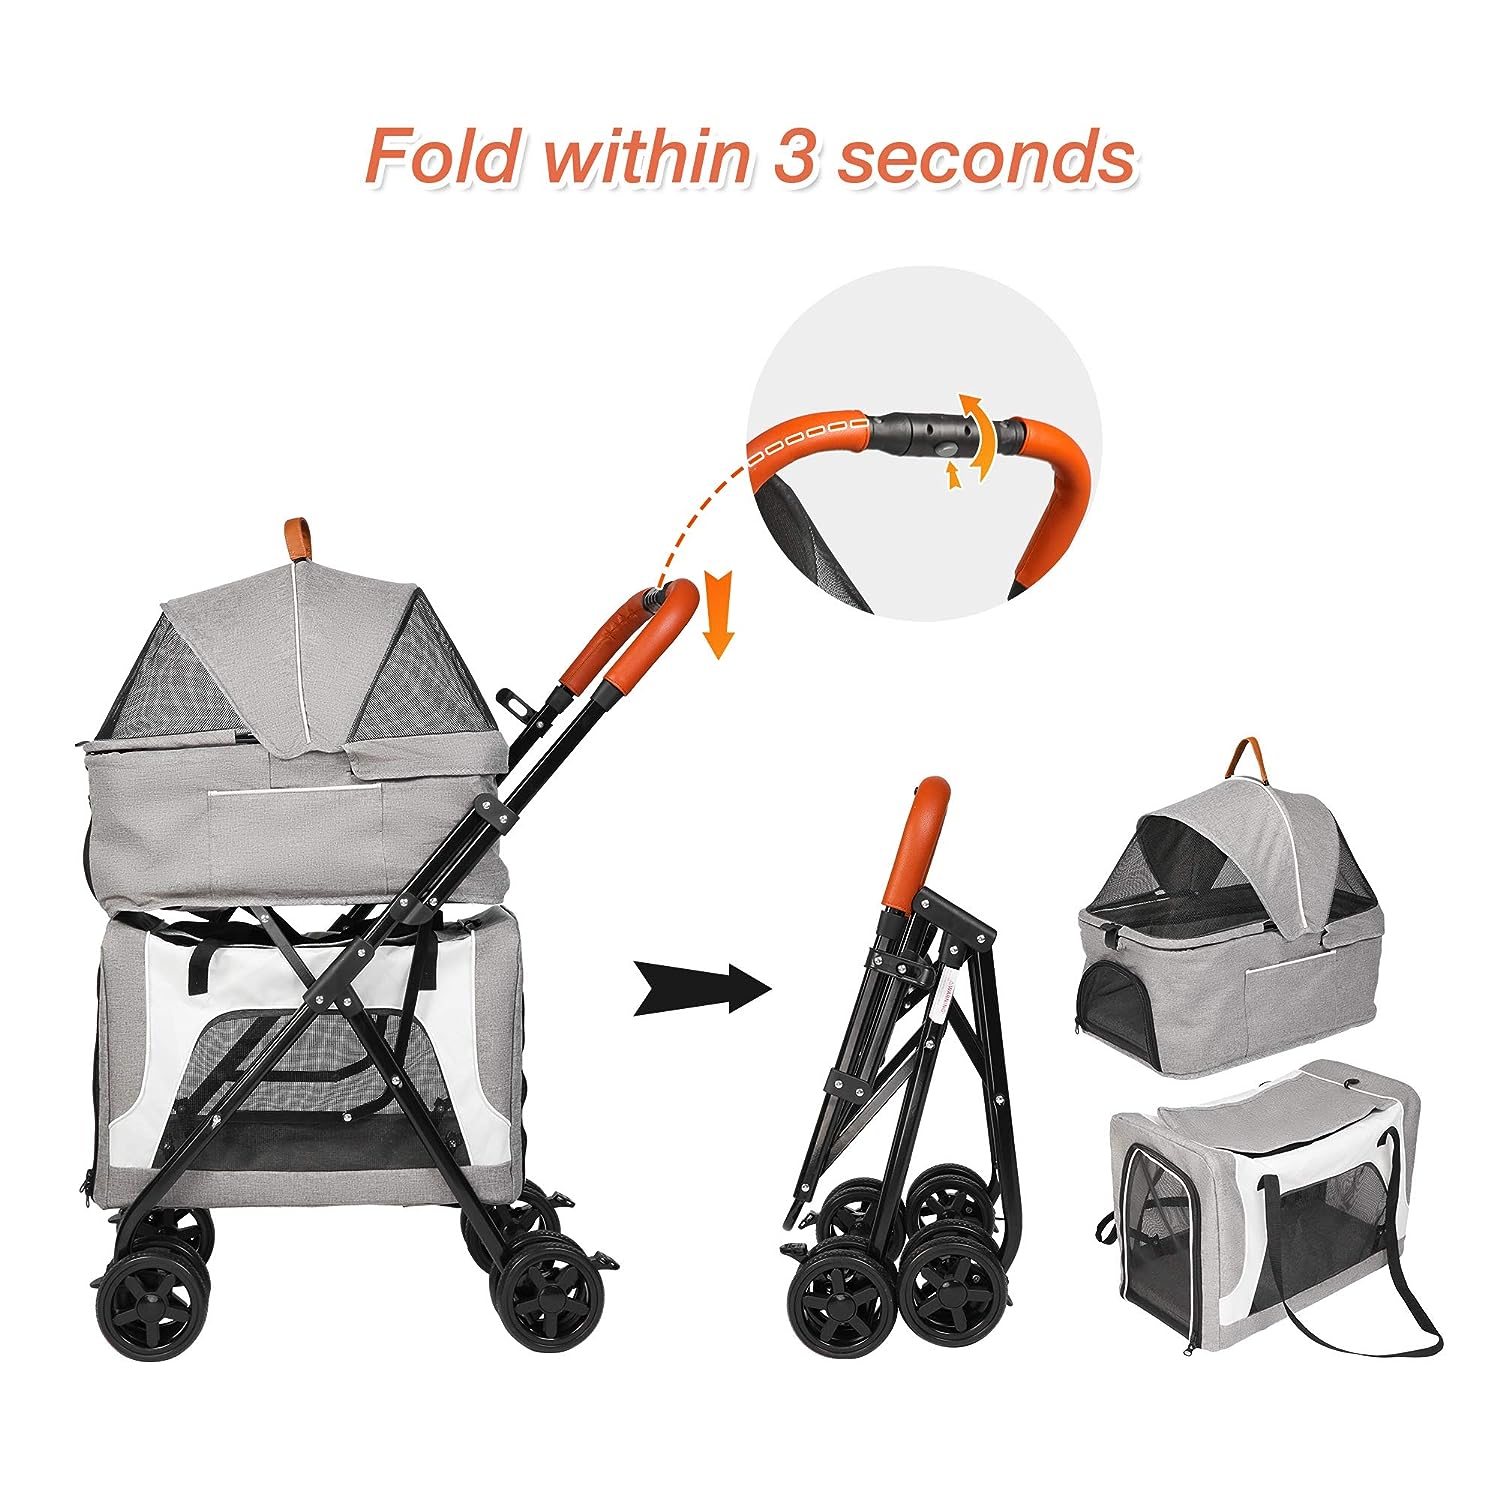 3 in 1 Double Seater Dog Stroller Pet Carrier with Detachable Carrier Dual Entry, Gray